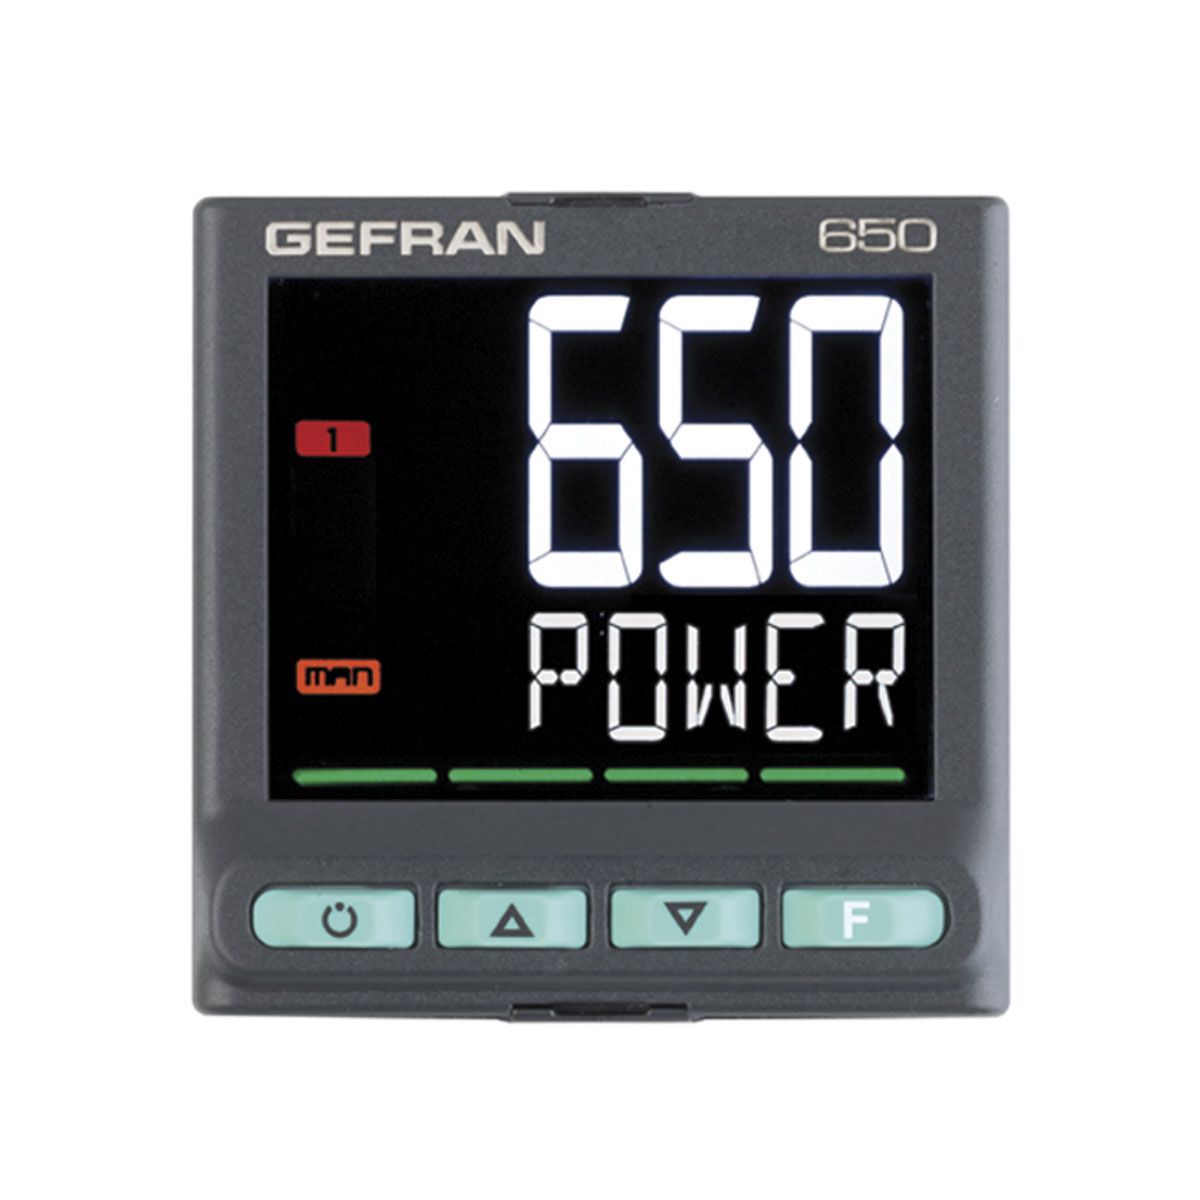 Gefran 650 PID Temperature Controller, 48 x 48mm, 3 Output Relay, 100 → 240 V ac Supply Voltage